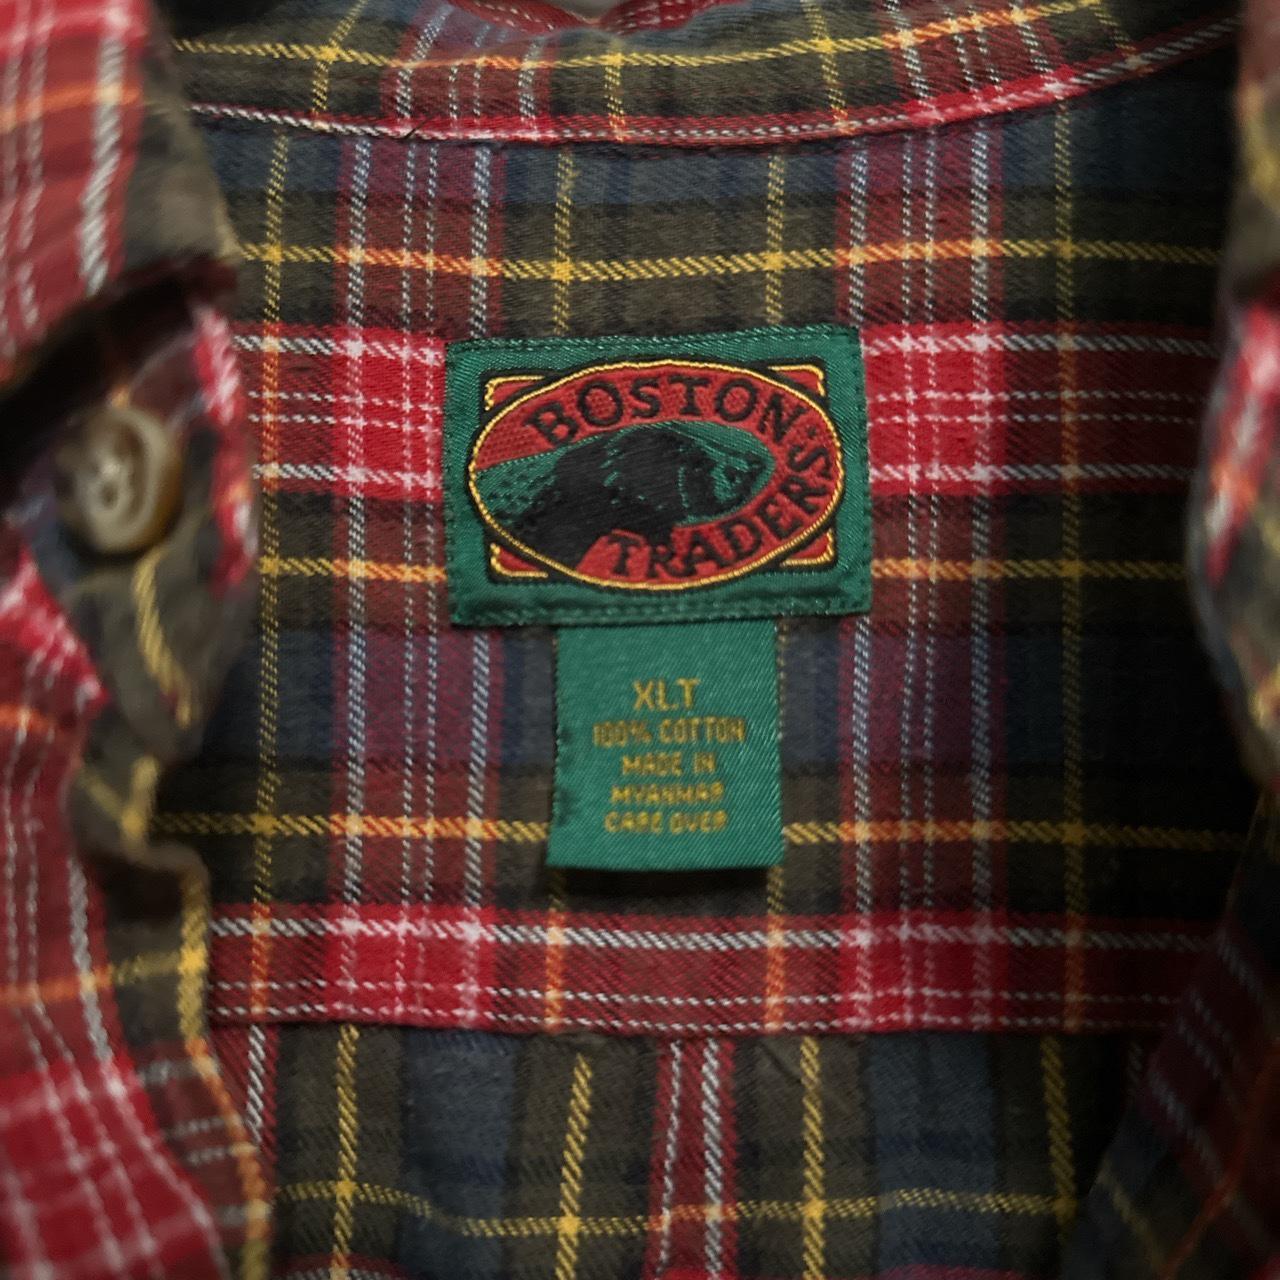 red sox flannel shirt